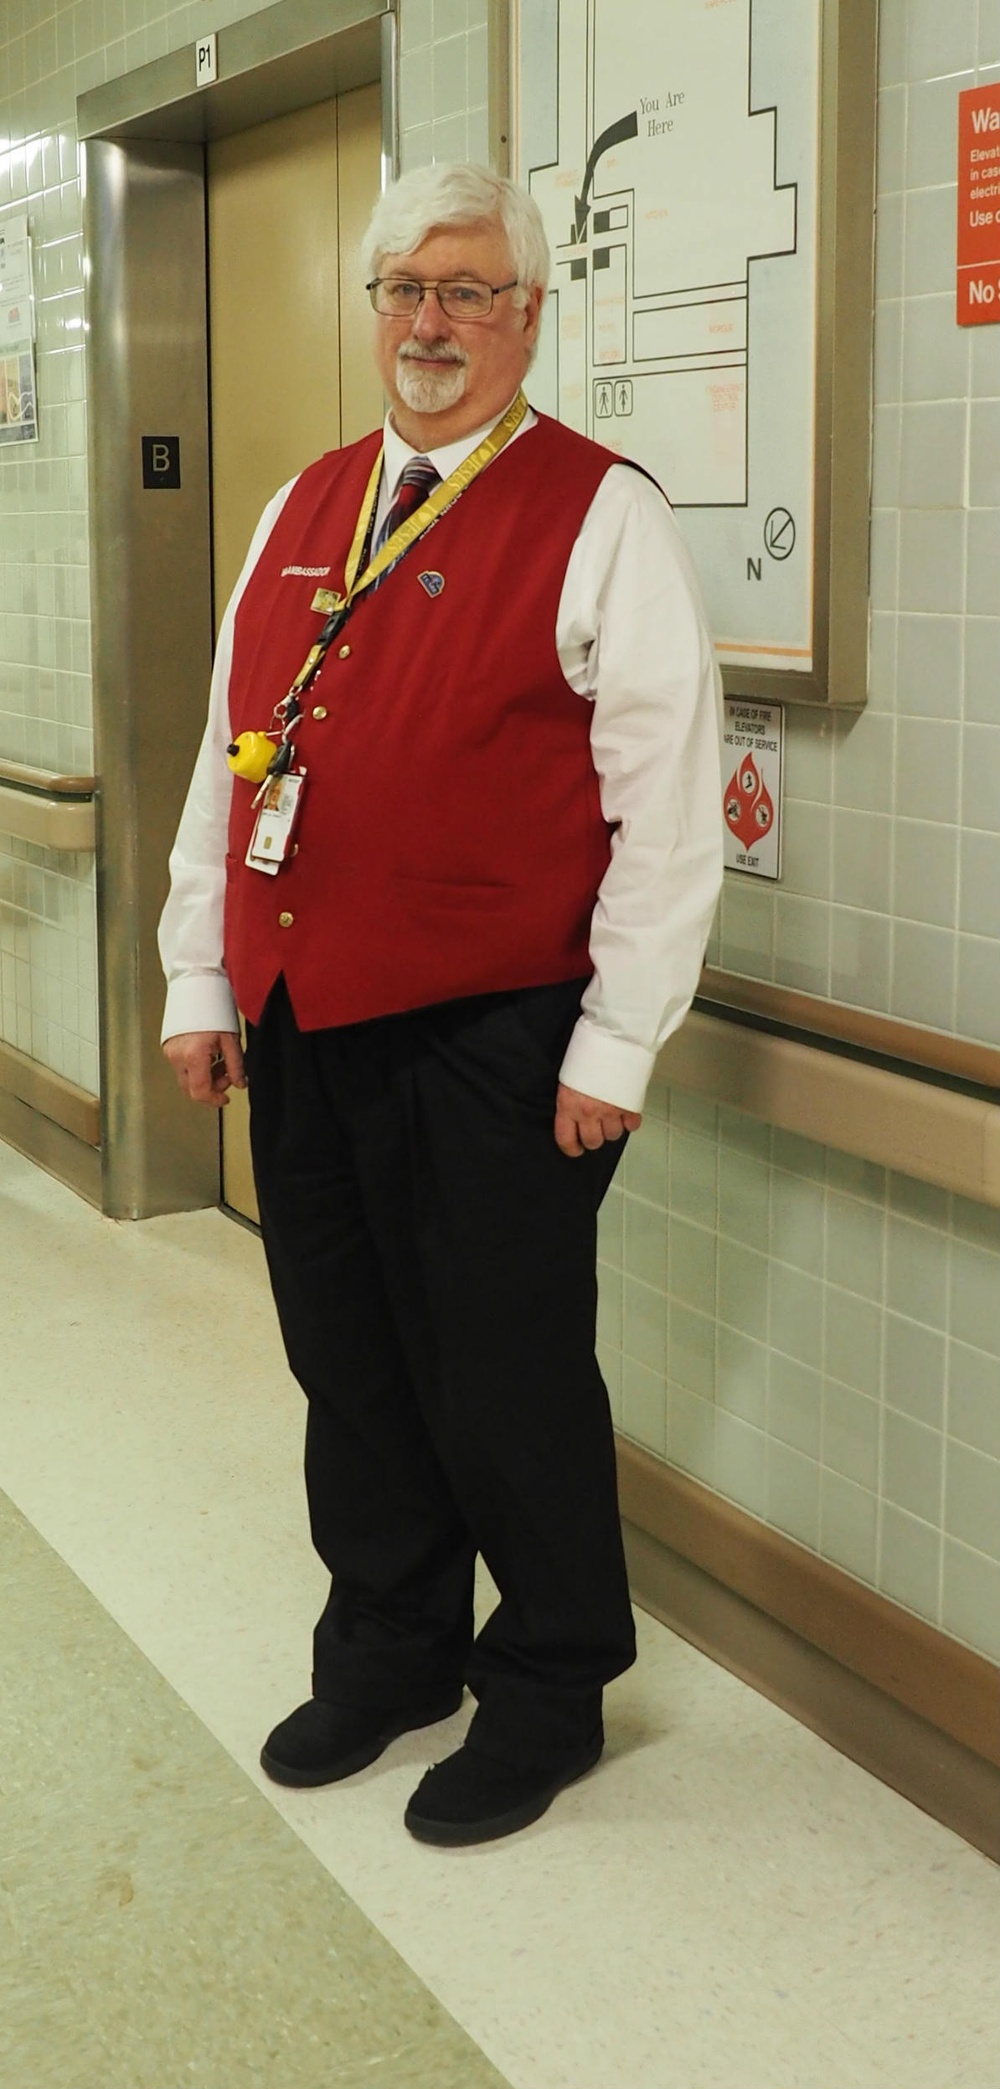 Stepping into a new life, healthy heart for Columbia VAHCS employee